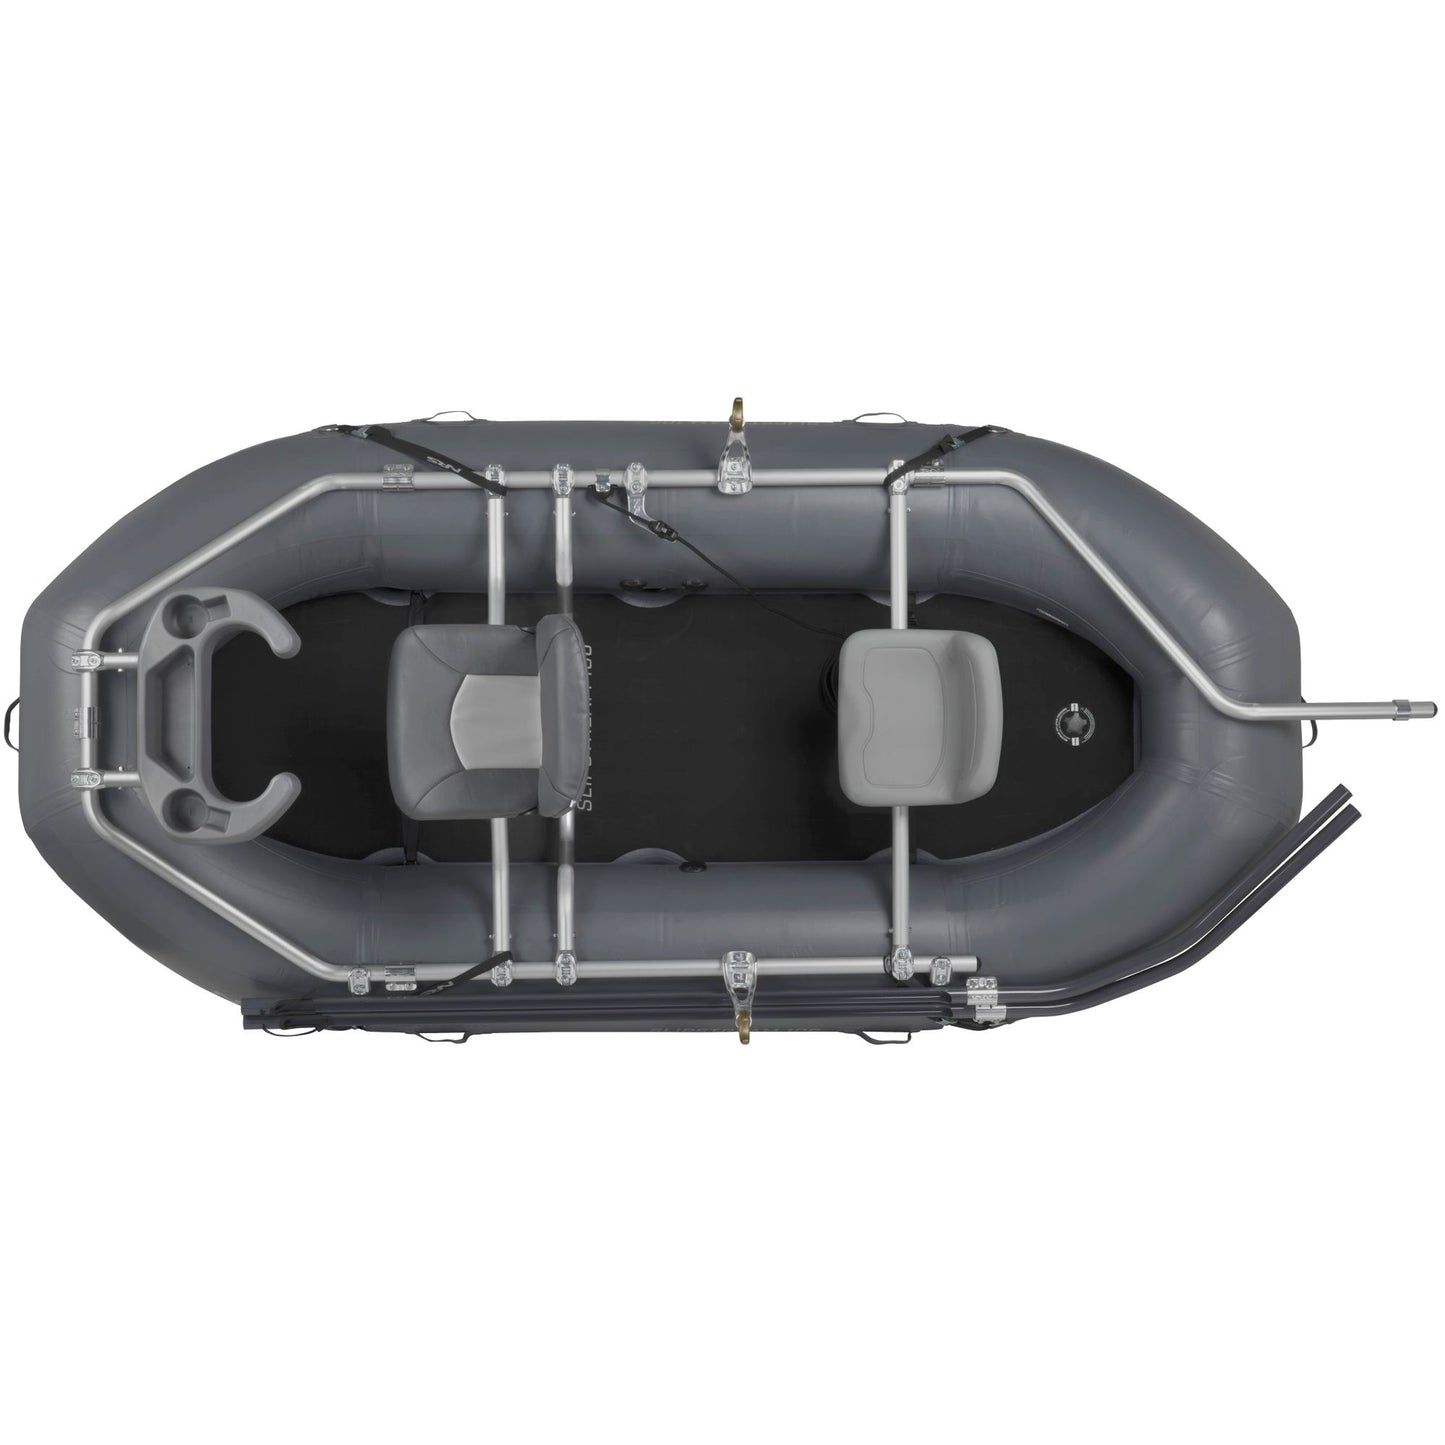 A gray NRS Slipstream Fishing Raft with a seat, two seats, and a slip-resistant foam pad.